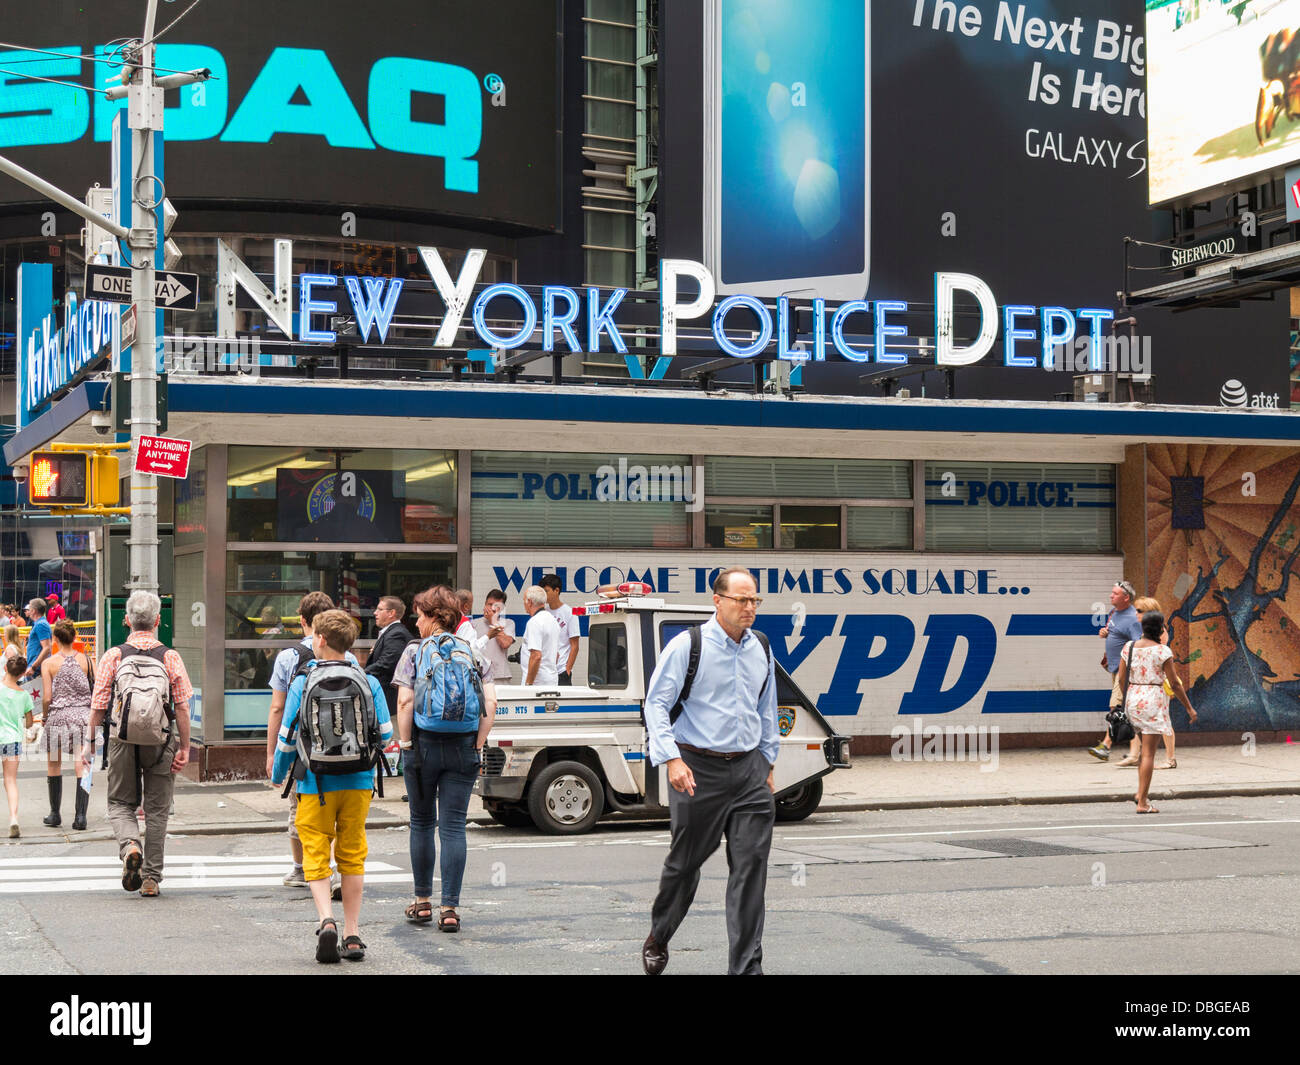 NYPD at Times Square, New York City - police department station Stock Photo